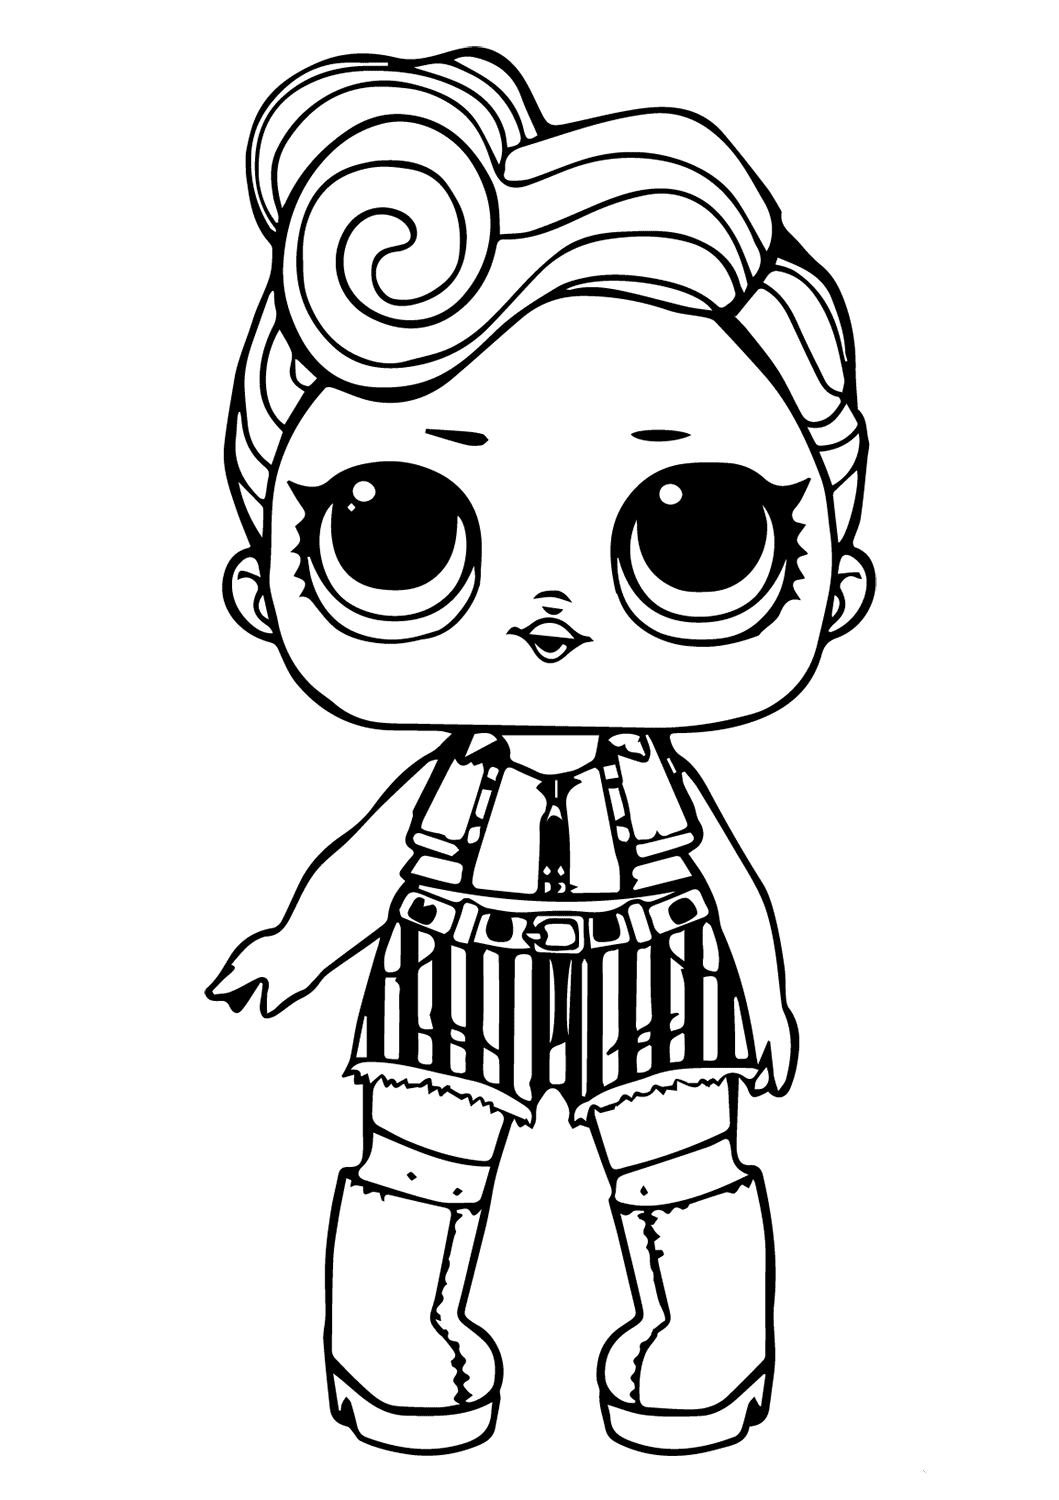 Coloring Book : Free Printable Lol Surprise Dolls Coloring Pages ...